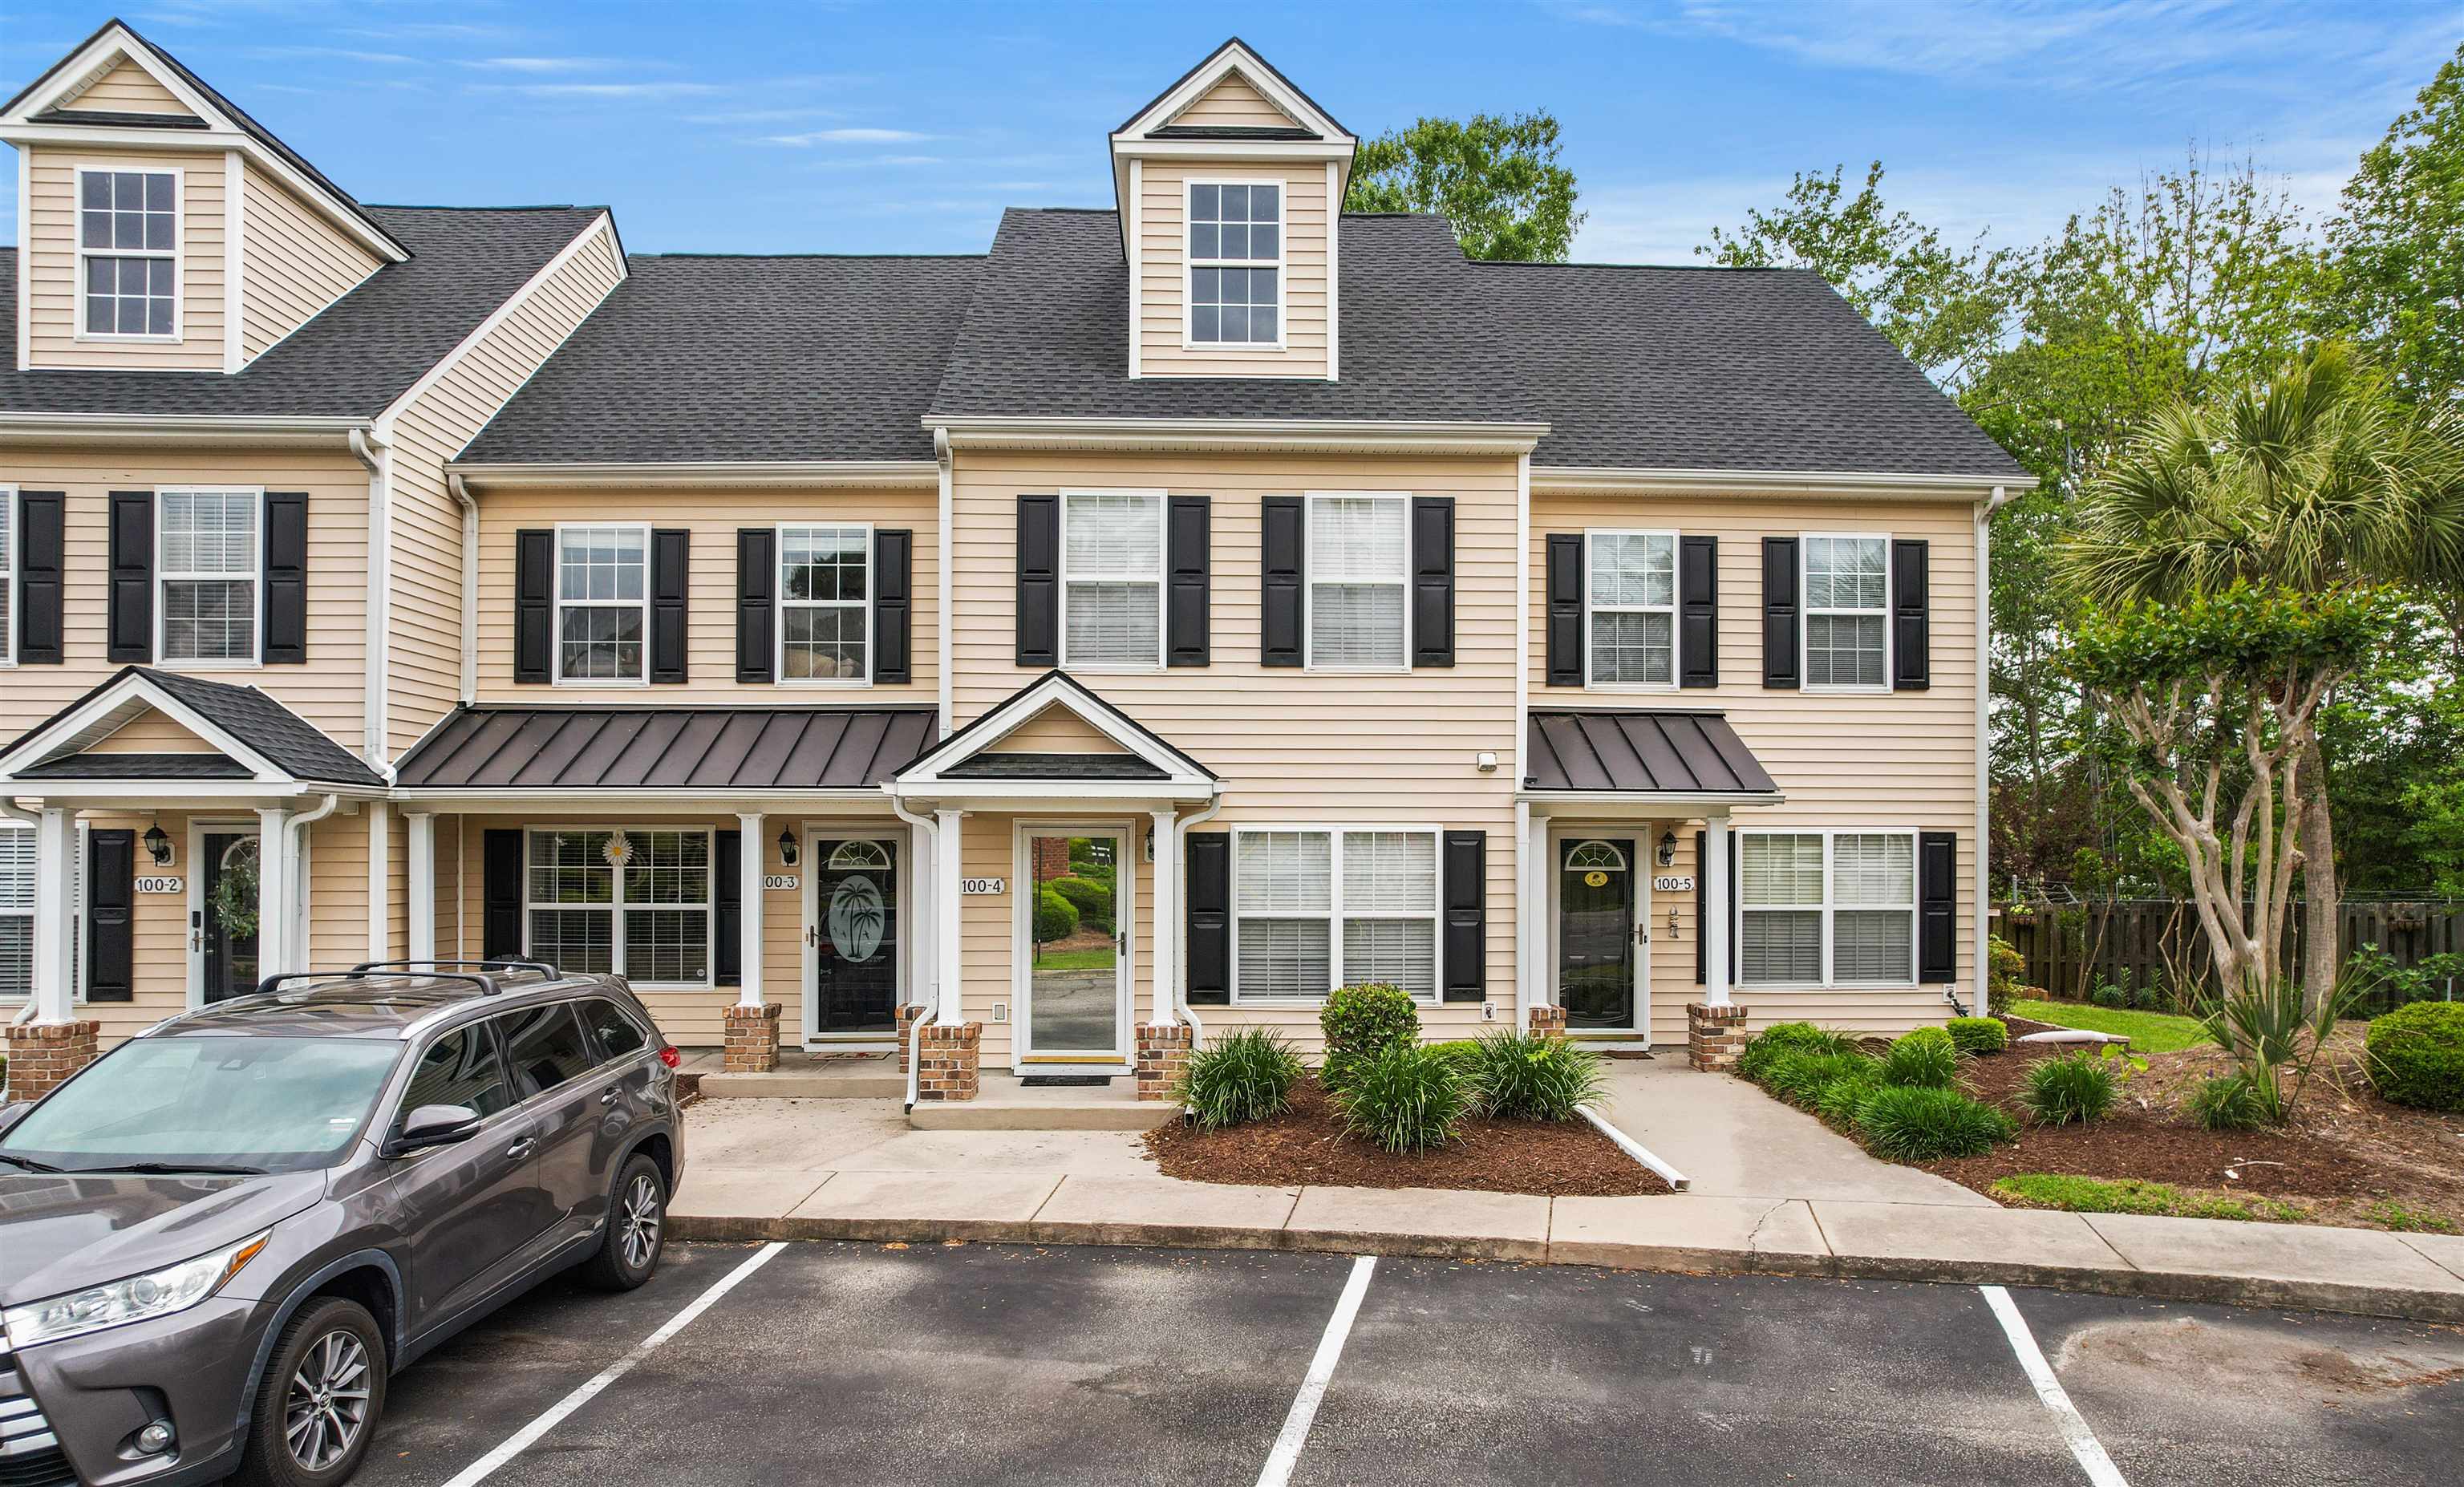 **open house friday, may 3rd, 11am - 1pm ***tucked away in the desirable merritt park community of little river, this charming two-story townhome features three bedrooms and two full baths, providing a cozy haven nestled amidst the lush carolina woods. recently updated with brand-new roofs in july/august 2023, this home exudes both comfort and style. as you step inside, you'll be greeted by the inviting ambiance of wood flooring throughout the downstairs area, adding a touch of elegance to the space. the main level boasts a spacious owner's suite complete with its own ensuite bath, offering convenience and privacy. step out onto the private back patio and take in serene water views, perfect for relaxing and enjoying the outdoors. the open-concept layout seamlessly connects the living room, dining area, and kitchen, creating a fluid and welcoming atmosphere. upstairs, two additional bedrooms share a full bathroom, providing ample space for guests or family members. conveniently located on the main level next to the kitchen, you'll find a discreetly placed laundry room hidden behind bifold doors, adding practicality to the home's layout. residents also have access to a community pool, with the hoa fee covering essential services such as water, sewer, trash, basic cable, landscaping, and pest control. with its prime location, this townhome offers easy access to nearby shops, restaurants, and entertainment options. plus, the beach is just minutes away, making it an ideal retreat for those seeking coastal living at its finest.